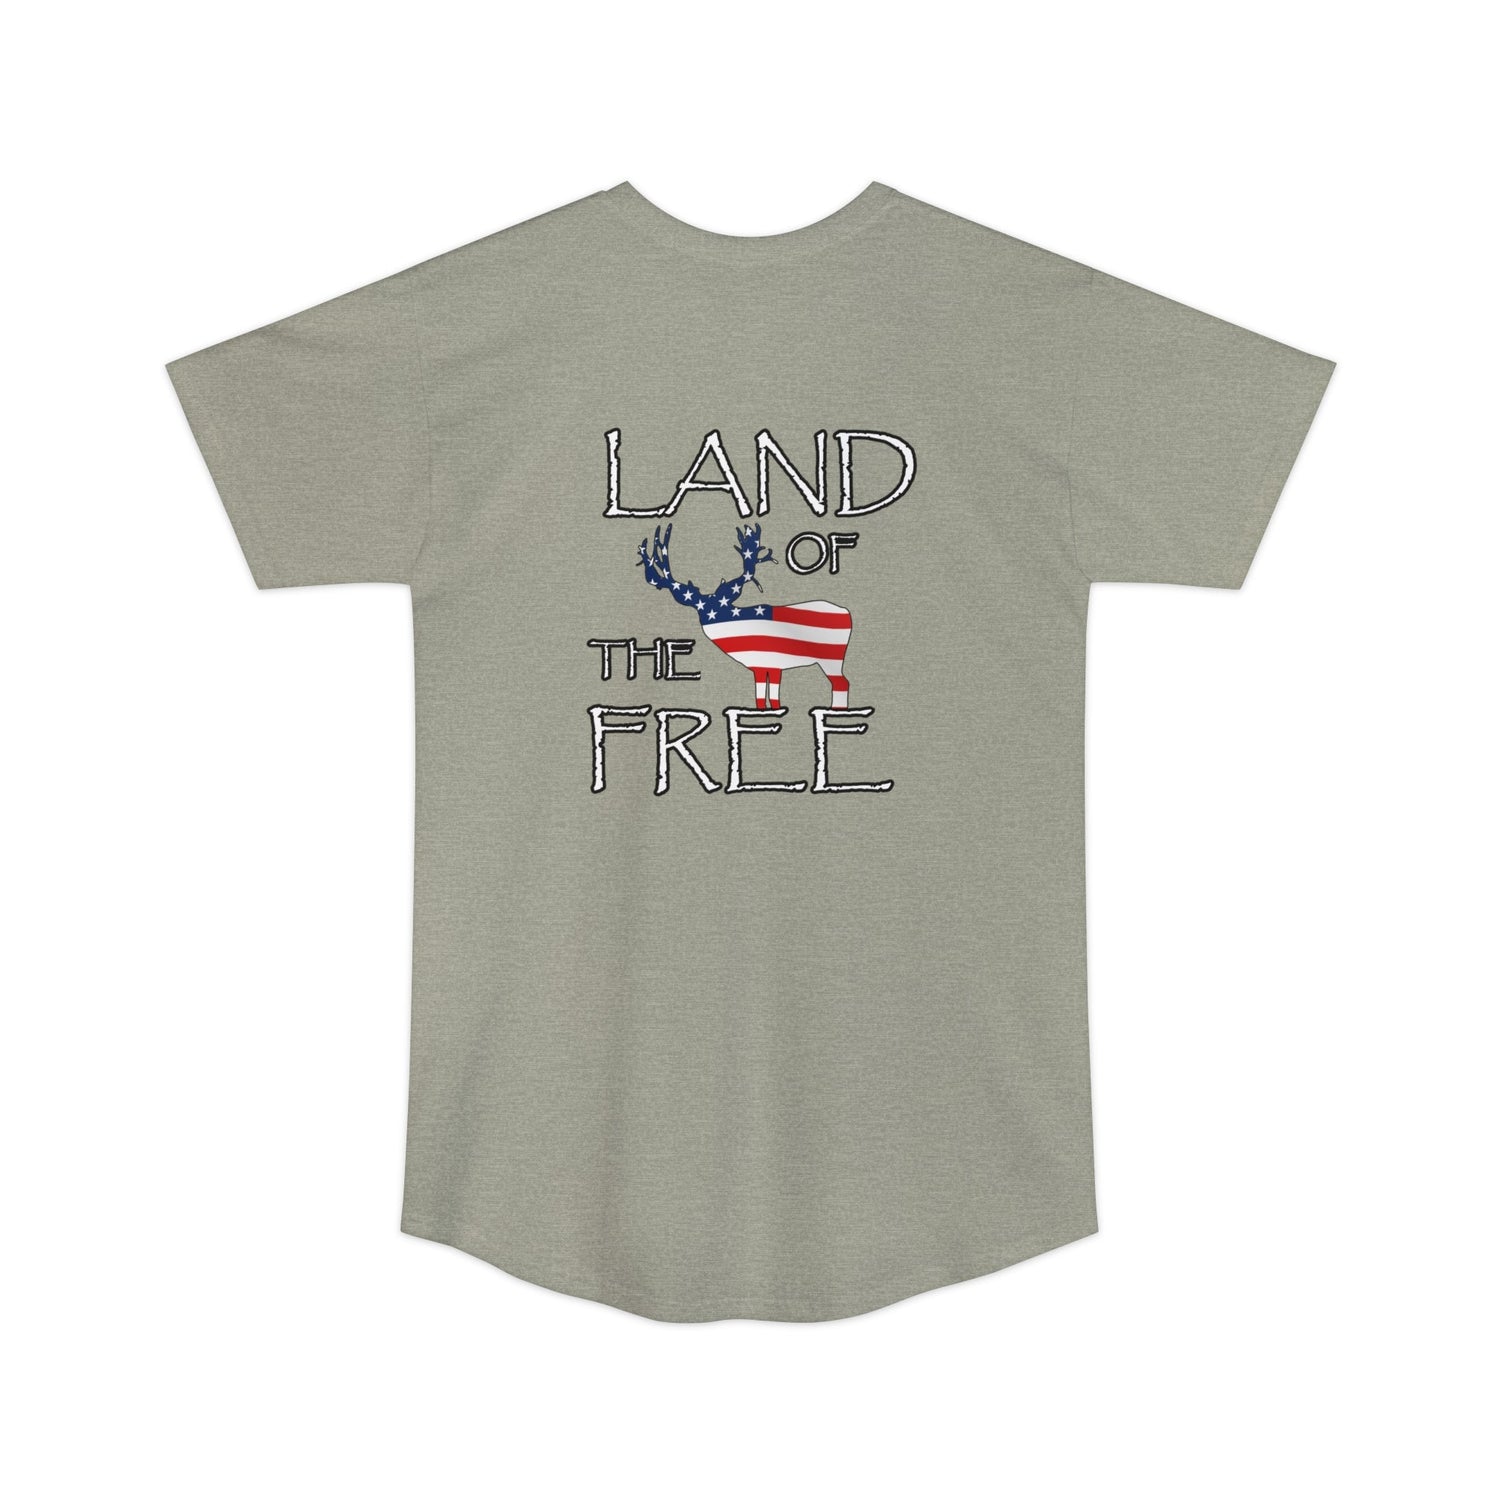 Athletic tall patriotic deer hunting t-shirt, color light grey, back design placement